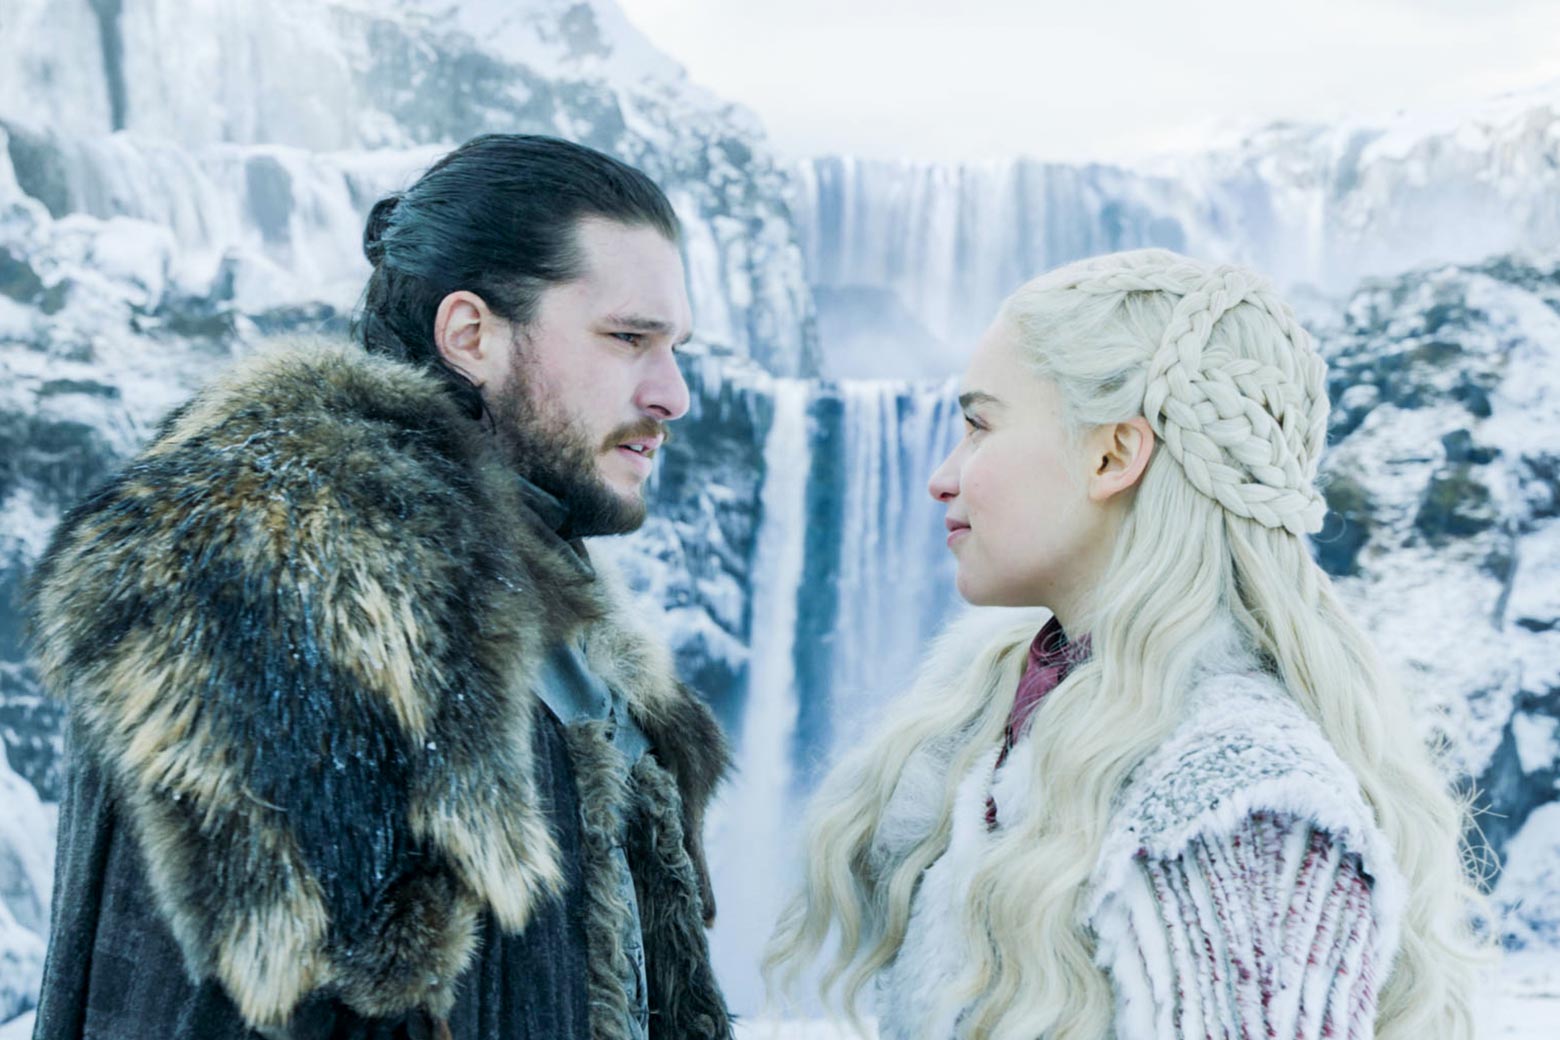 Aunty Forced By Boy - Game of Thrones: How bad is it to marry your aunt, as Jon Snow might do?